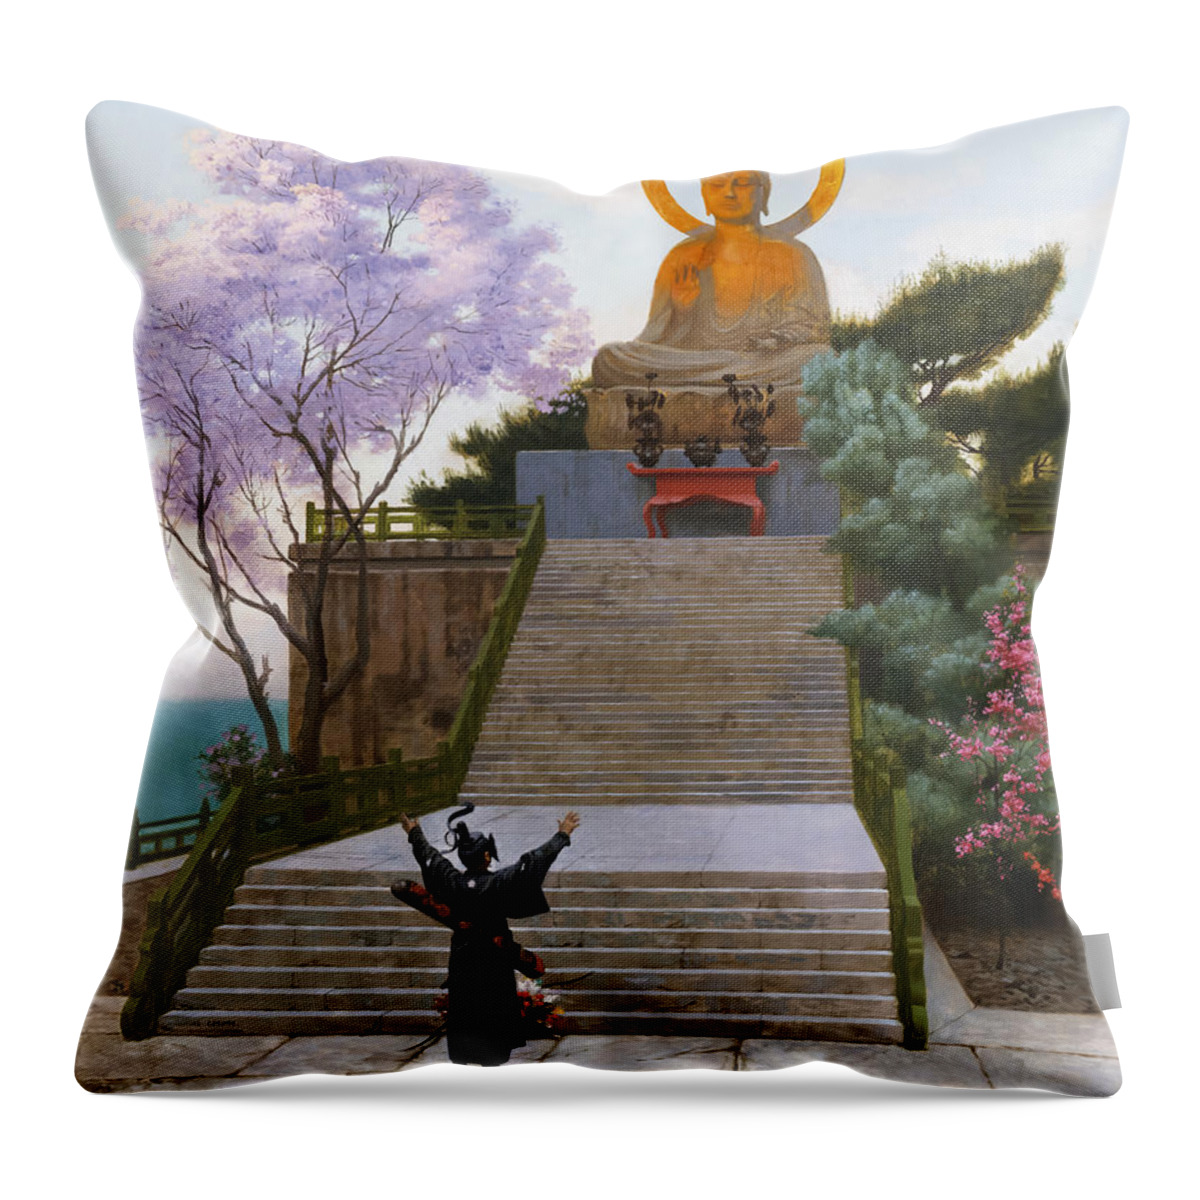 Japanese Throw Pillow featuring the painting Japanese Emploring A Deity by Jean Leon Gerome by Mango Art